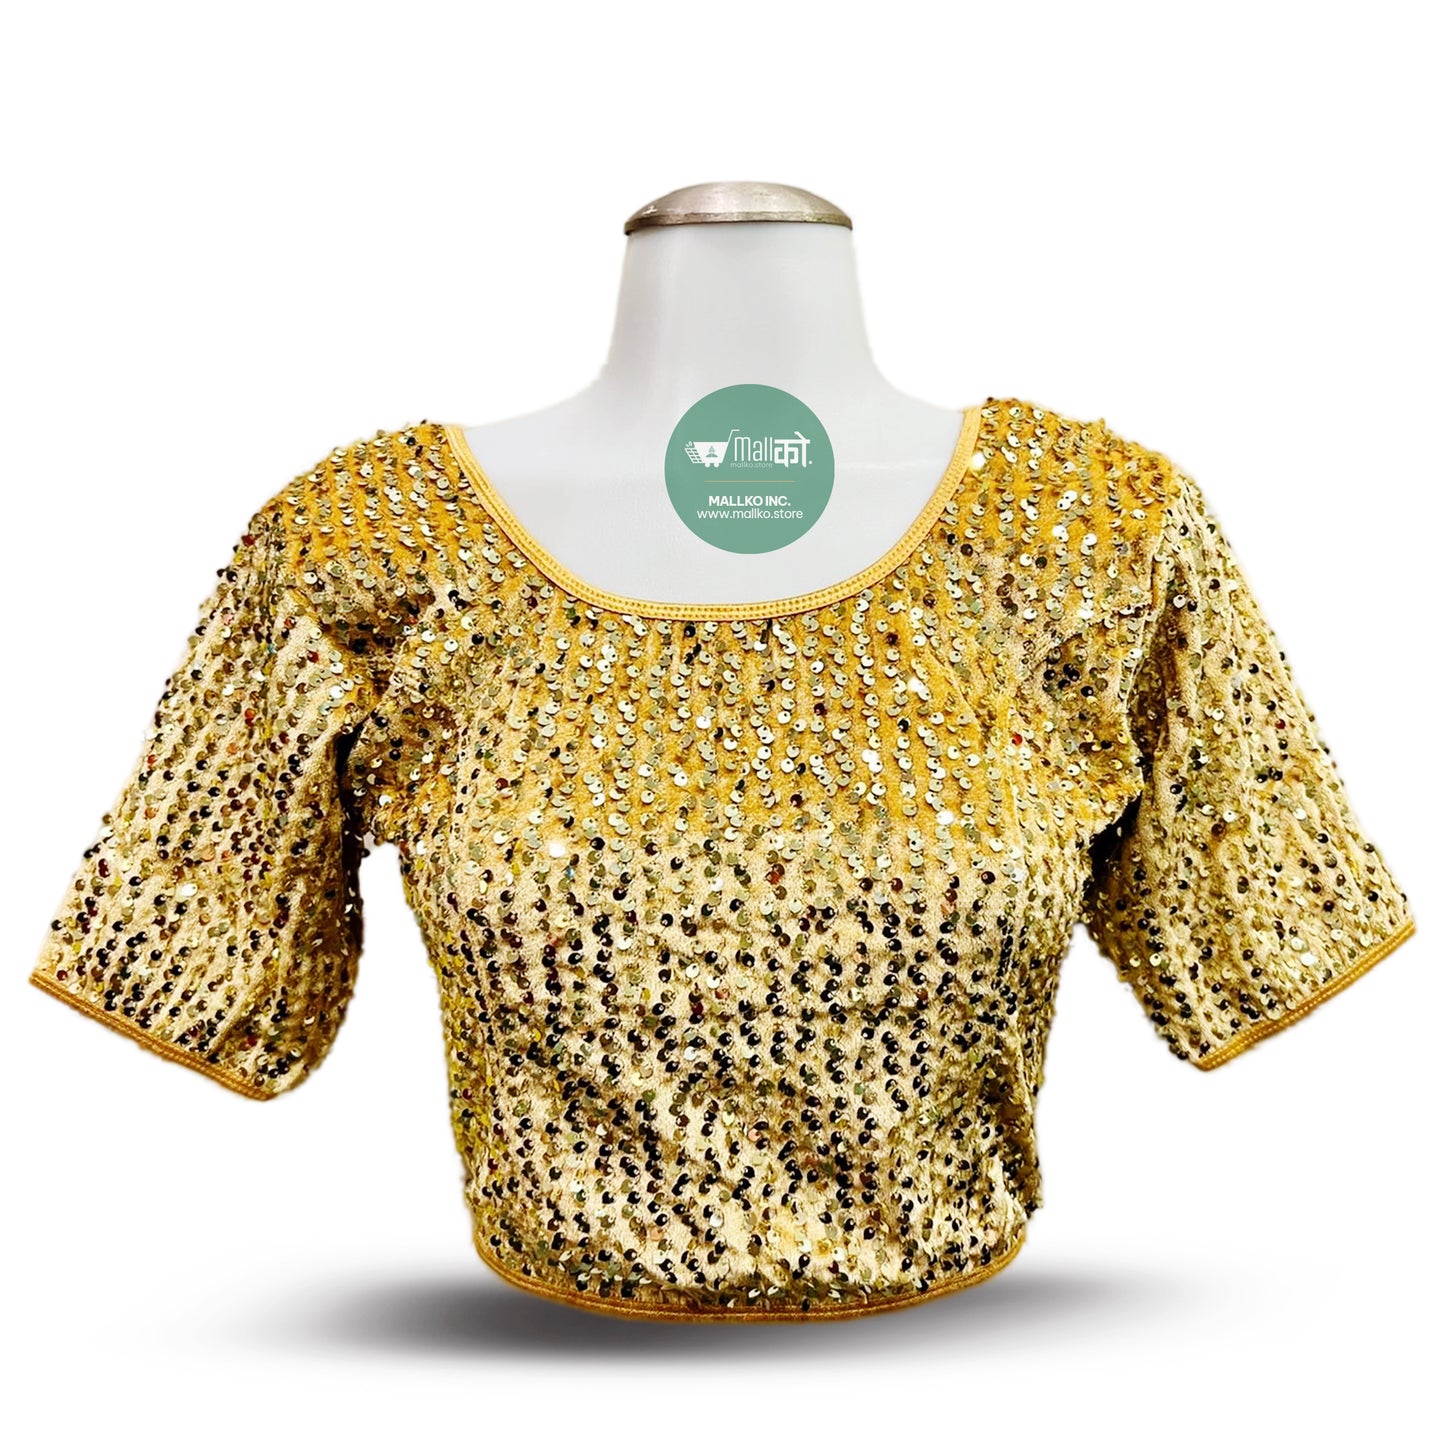 Women's Sparkling  Gold Double shaded Sari Blouse / Crop Top.